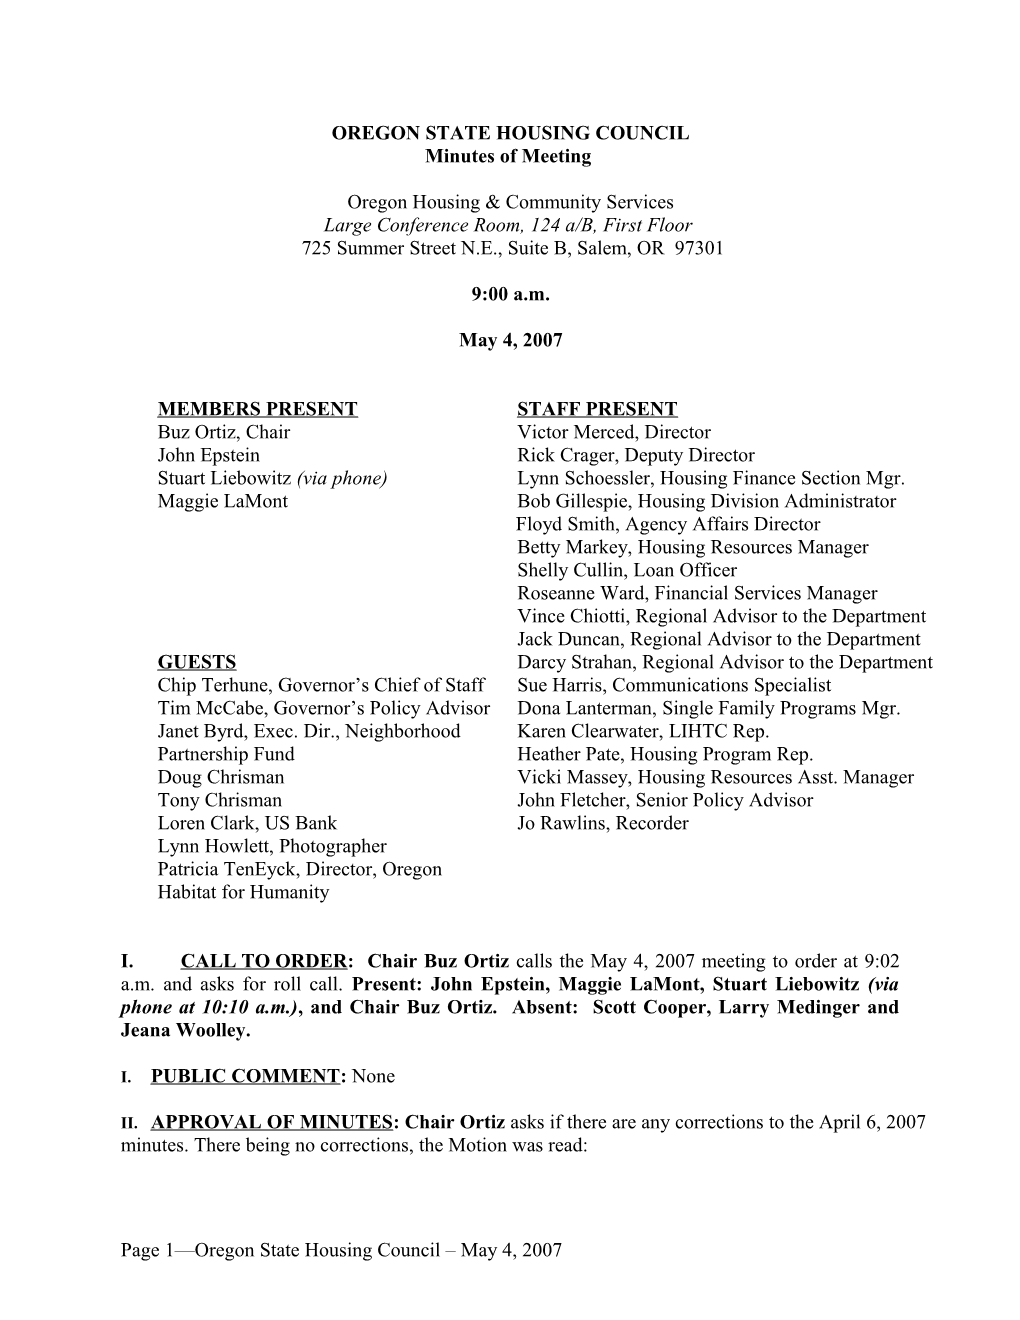 05-04-2007 State Housing Council Meeting Minutes